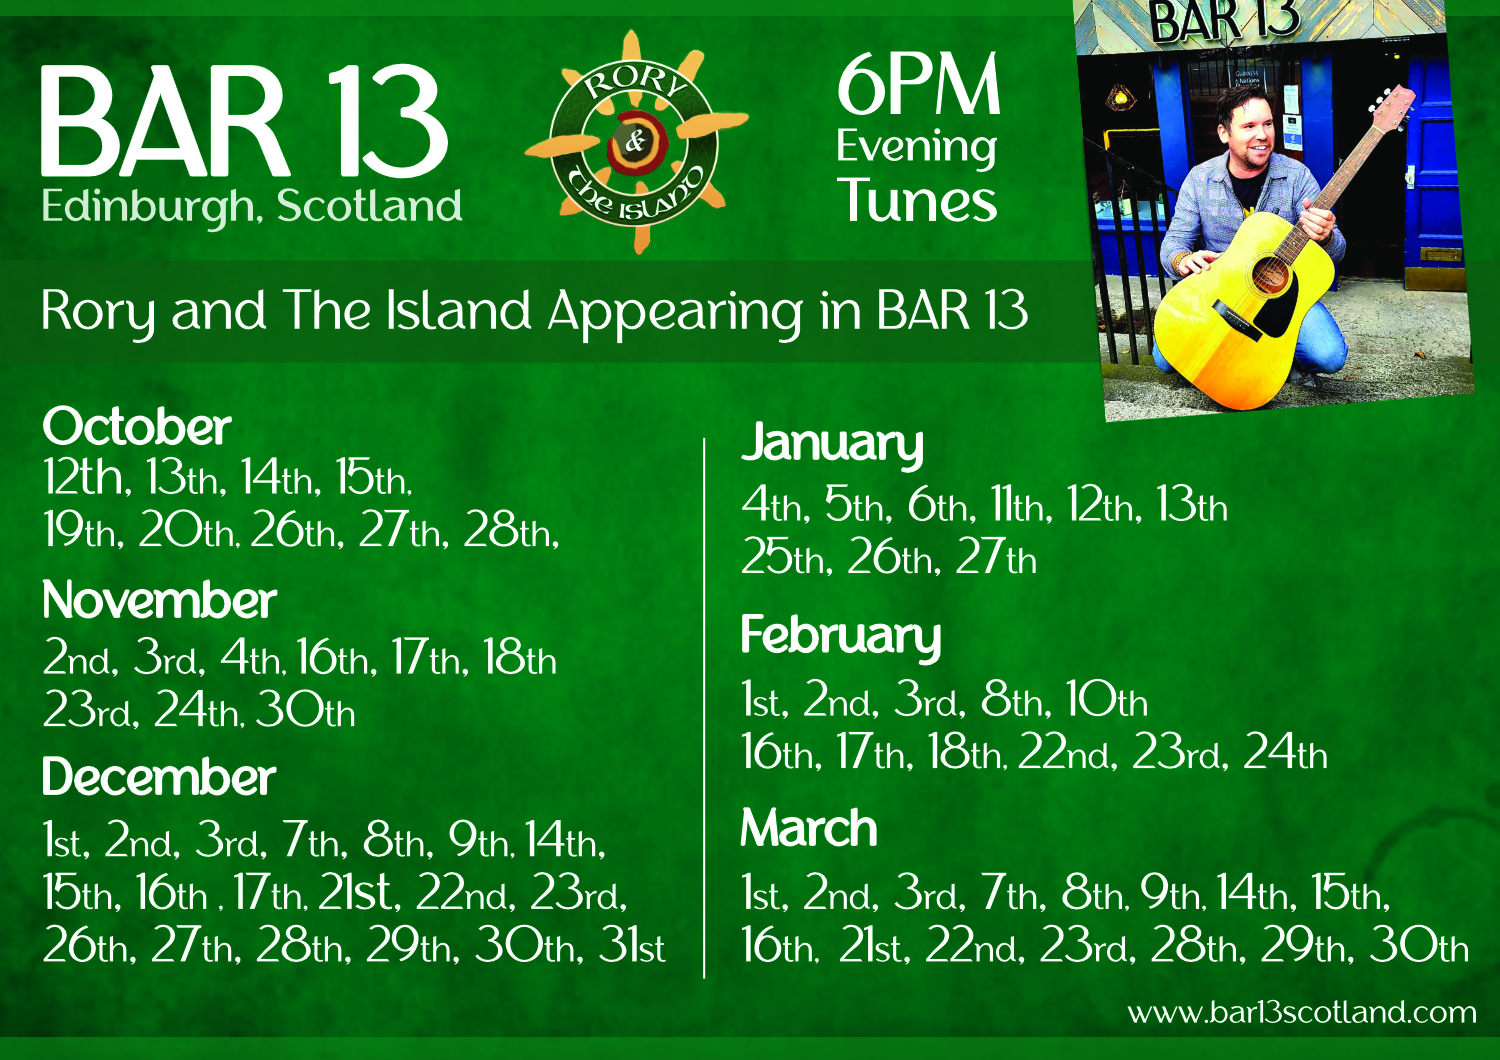 Live Music at Bar 13 from Rory & The Island